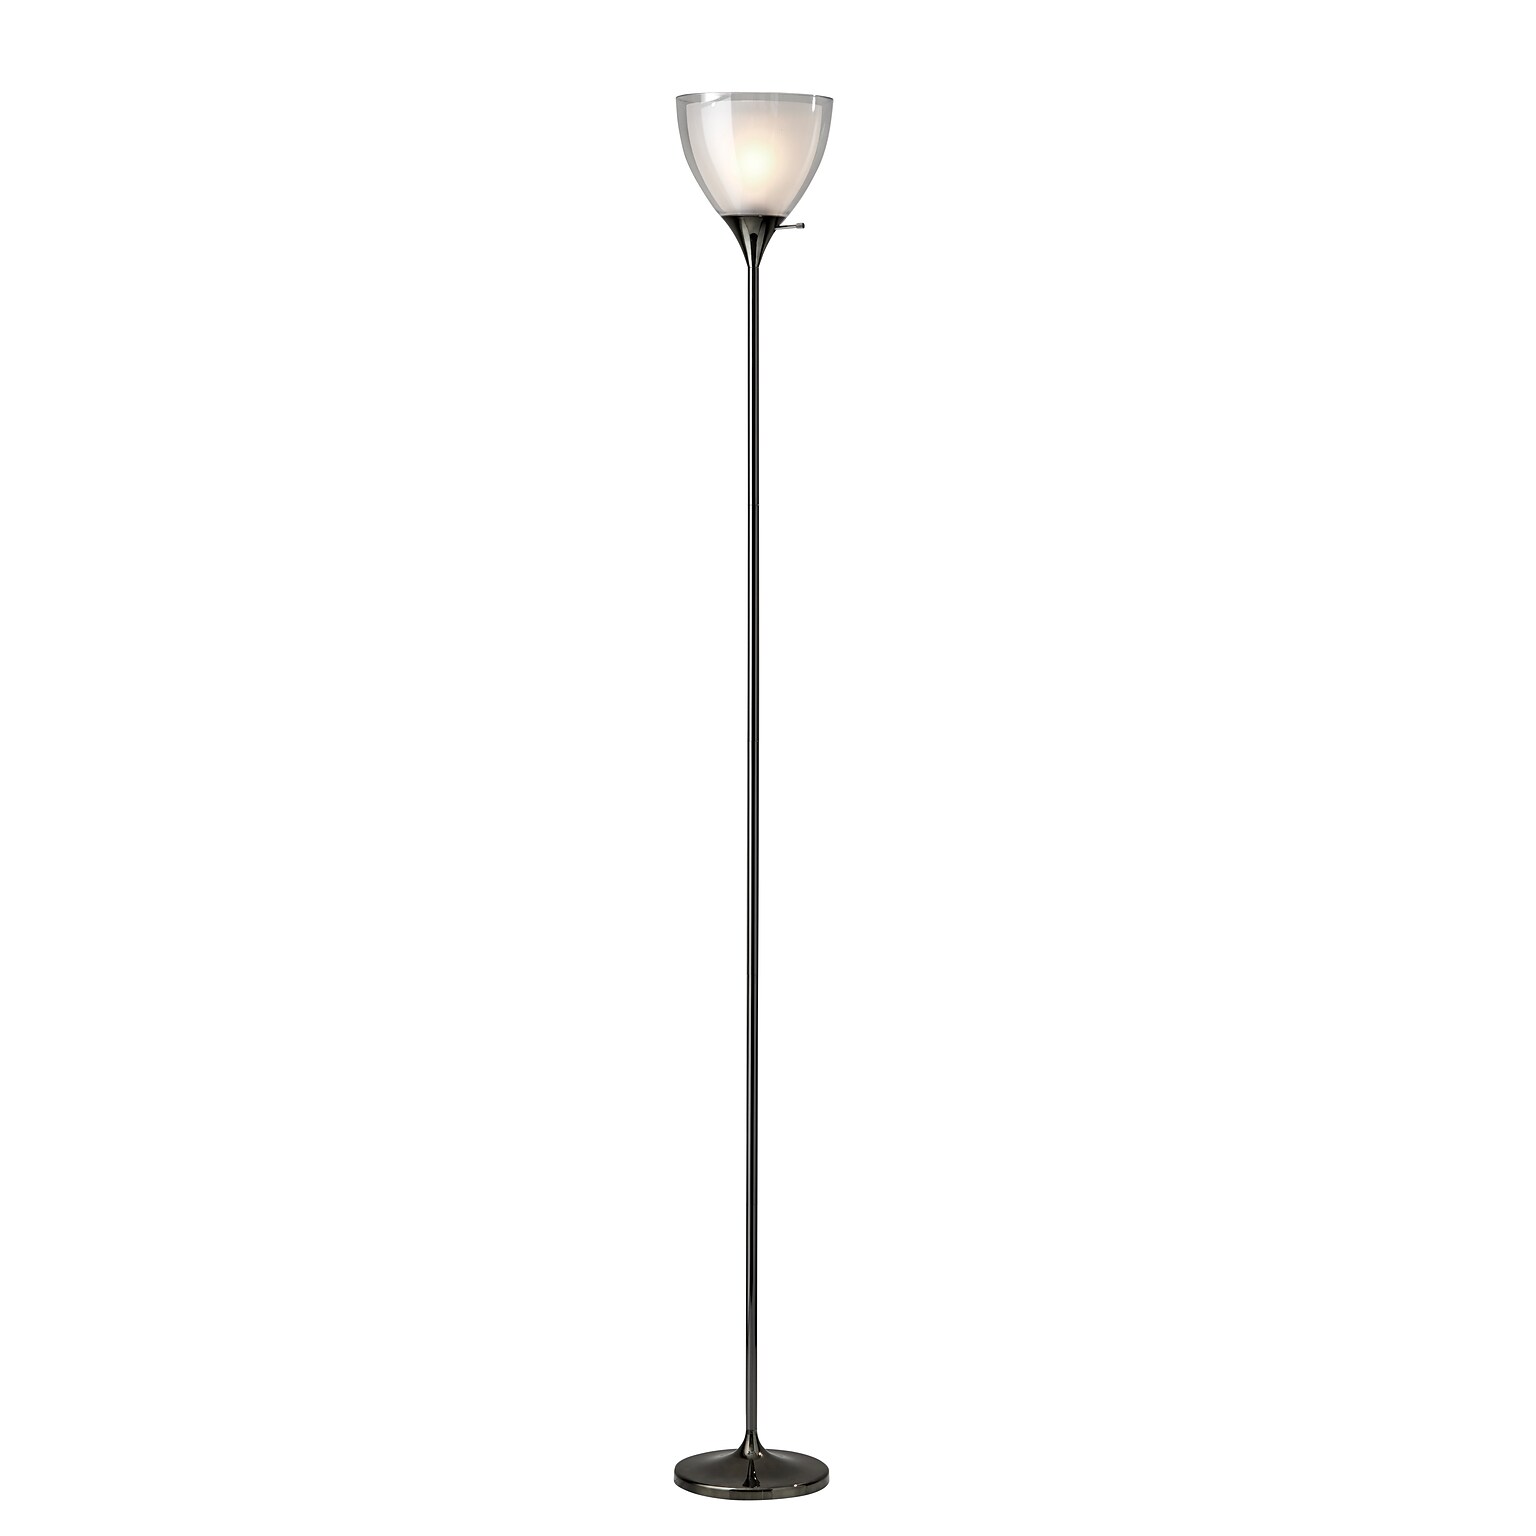 Adesso® Presley 72H Black Nickel Torchiere Floor Lamp with Frosted Bowl Shade (3565-01)